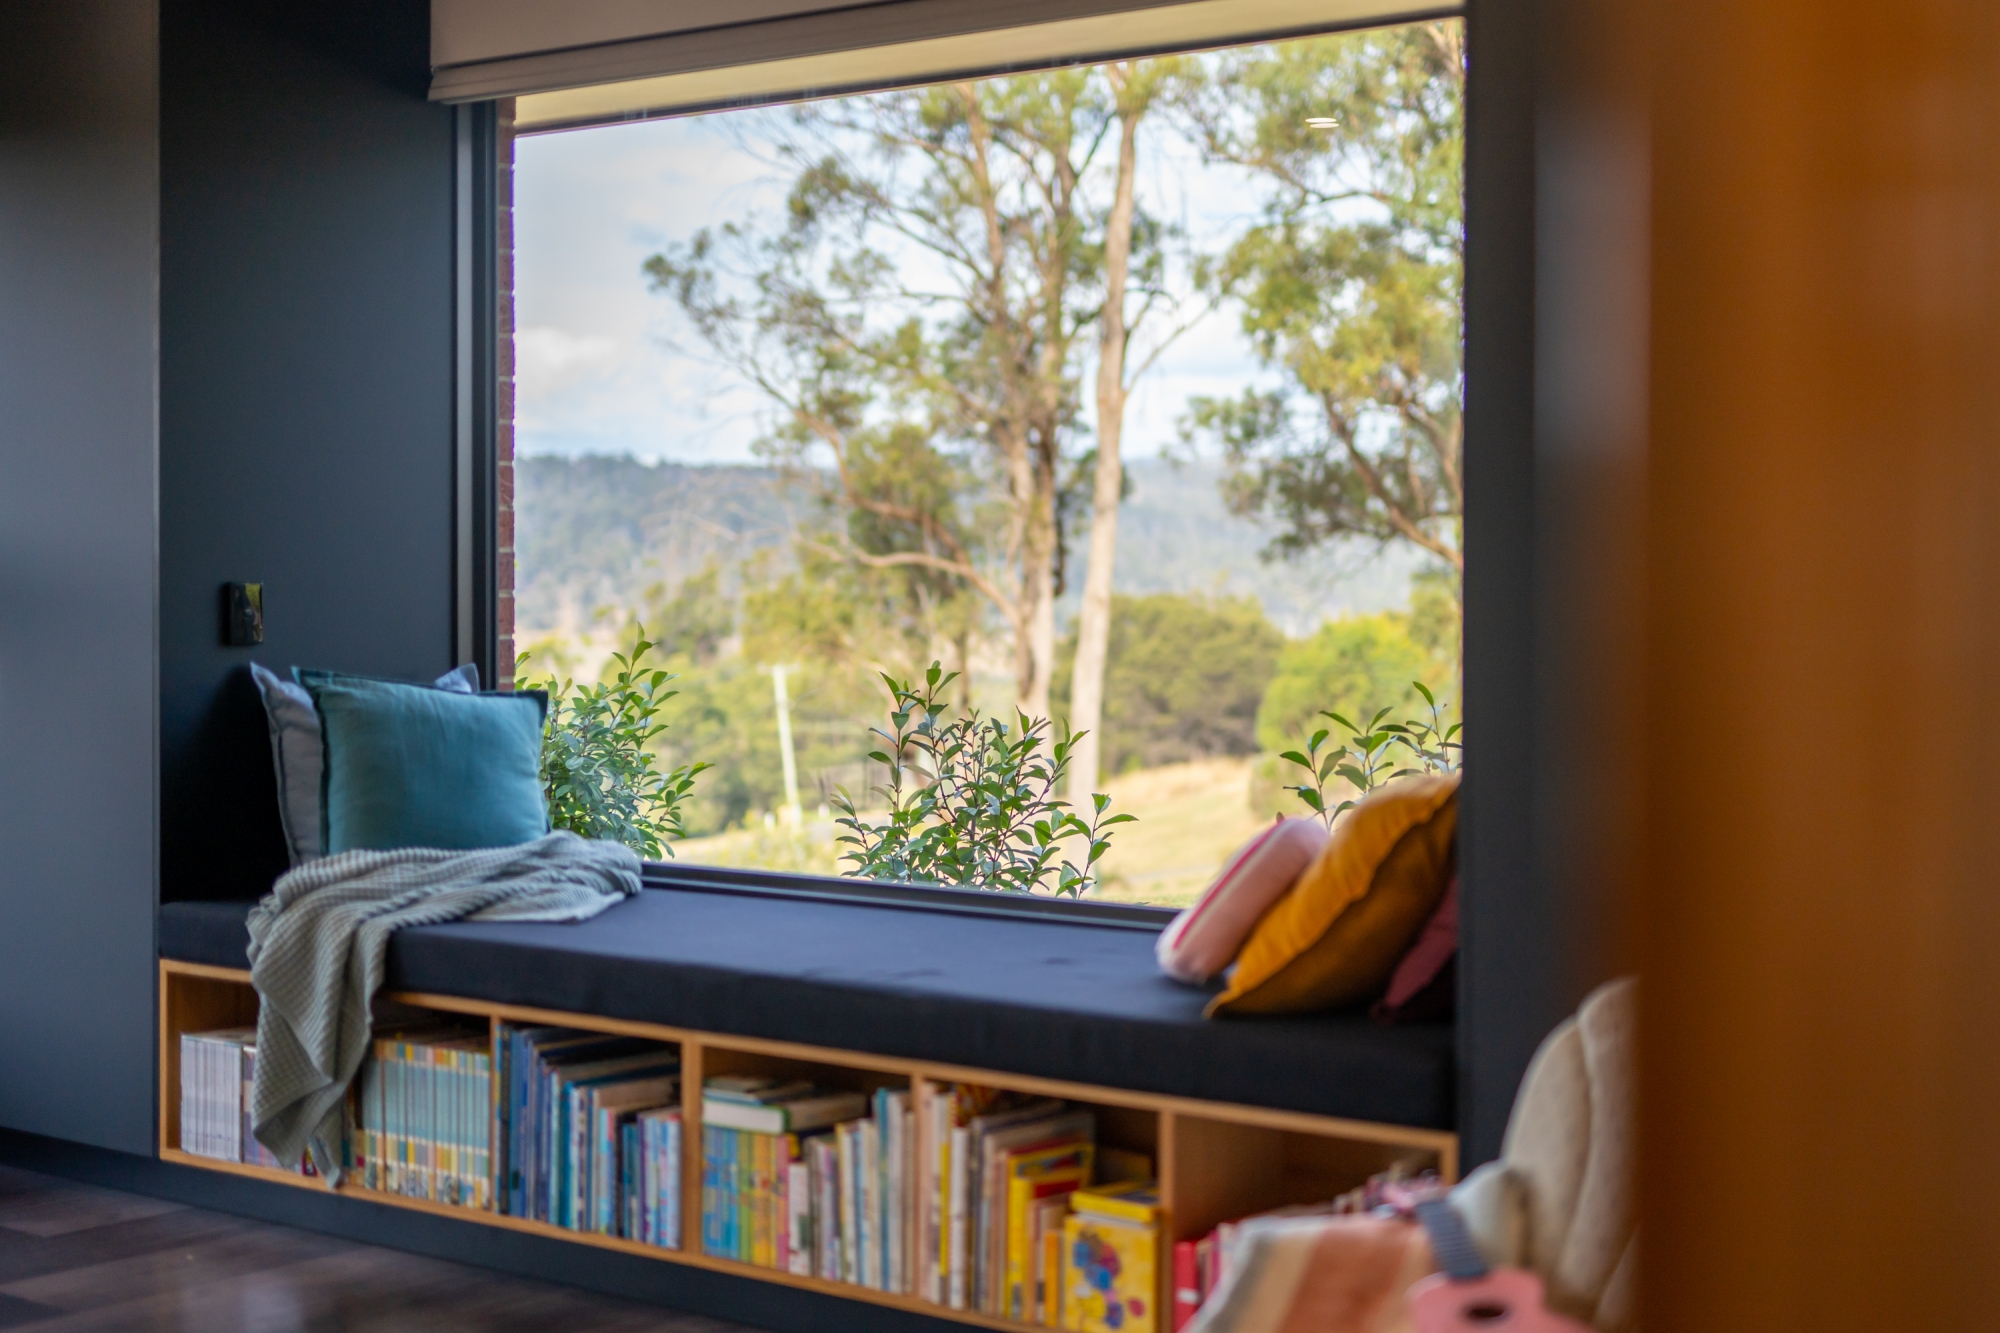 A window seat with storage for childrens books below and a window looking out to a bushy landscape